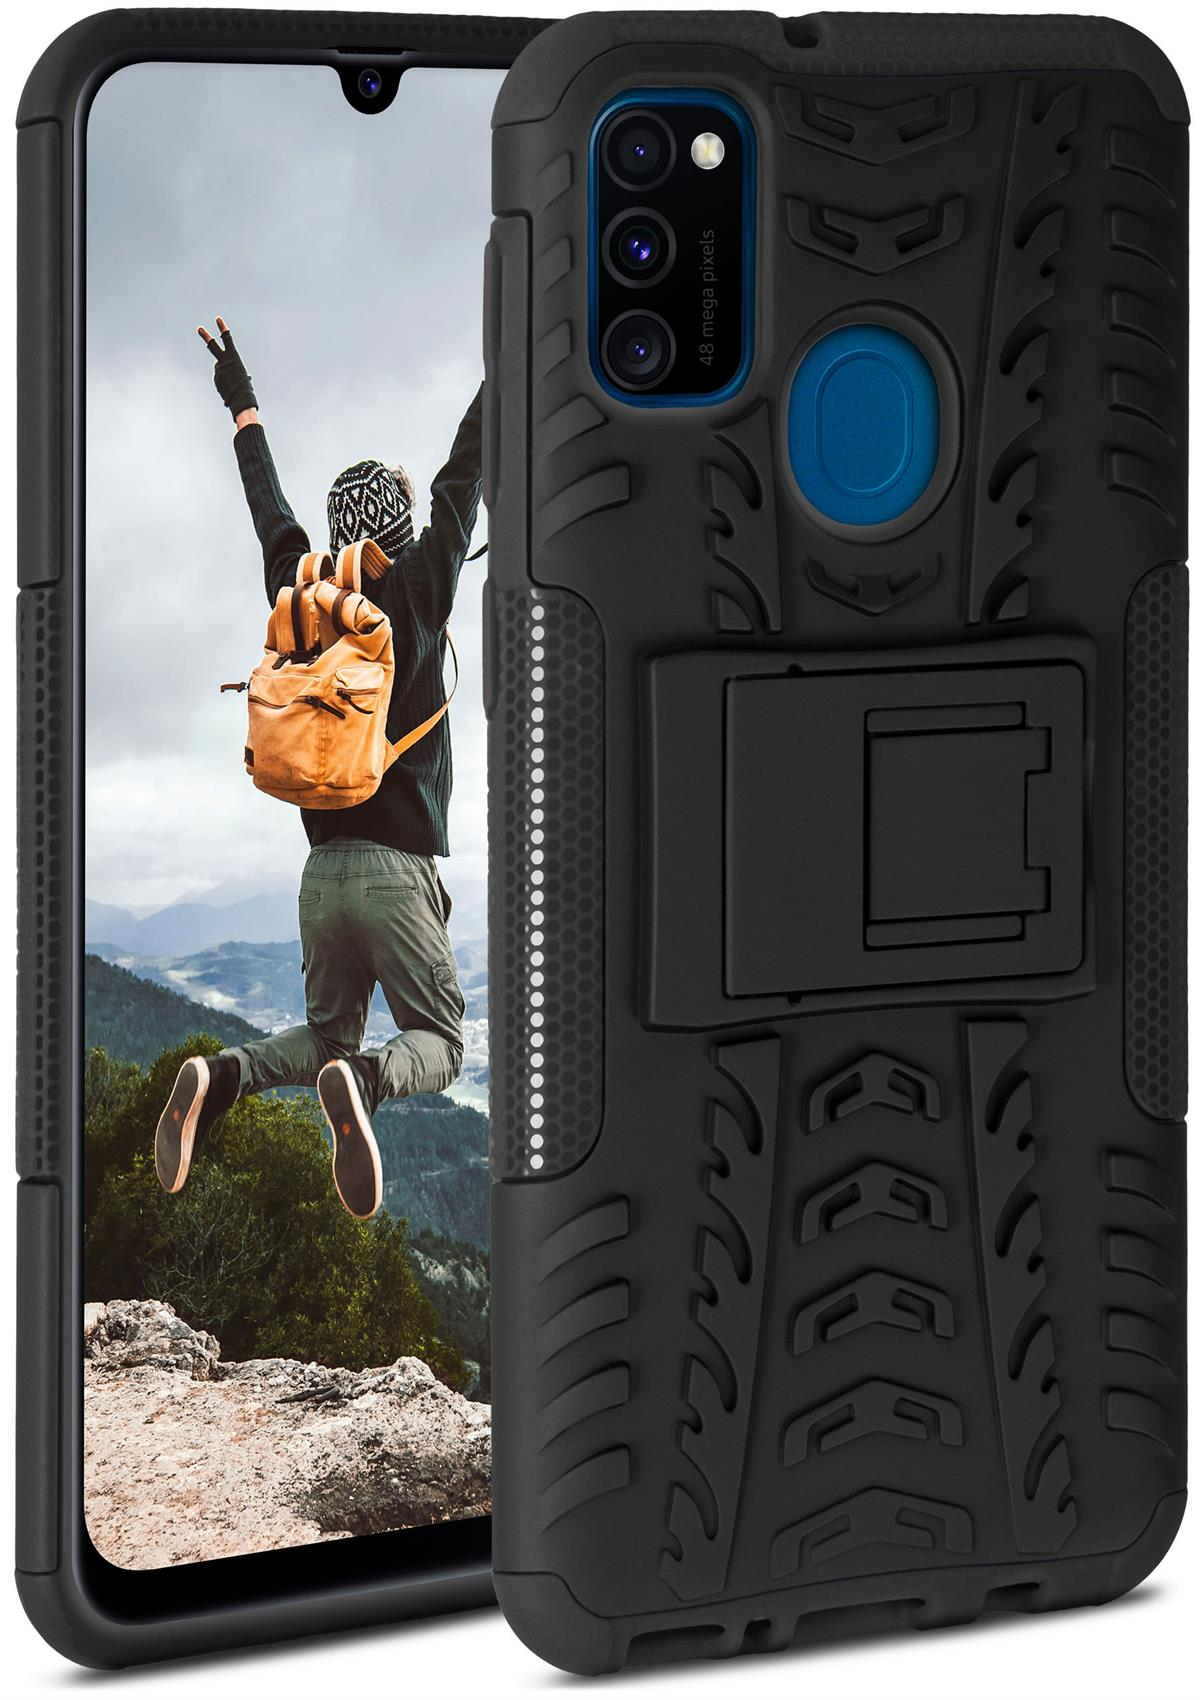 Obsidian Case, Tank Samsung, Backcover, ONEFLOW Galaxy M30s,